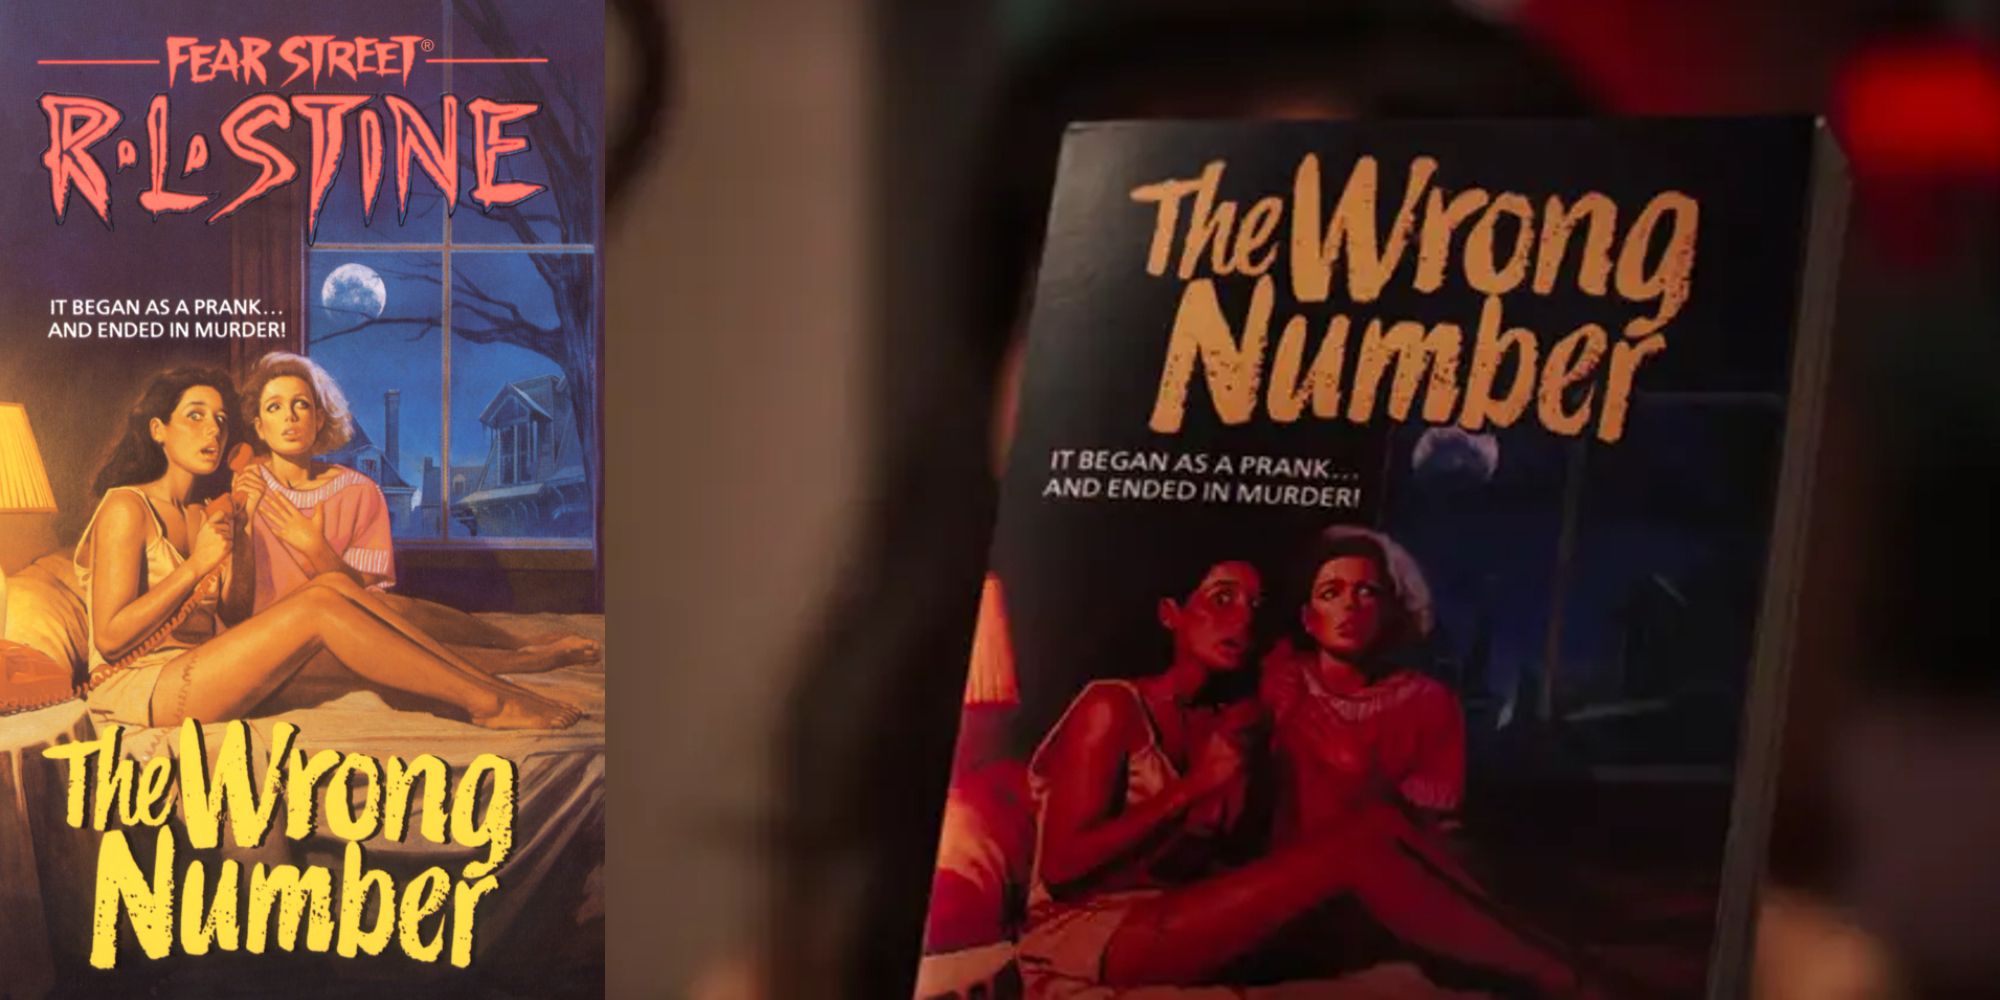 R. L. Stine Book The Wrong Number Fear Street Easter Egg